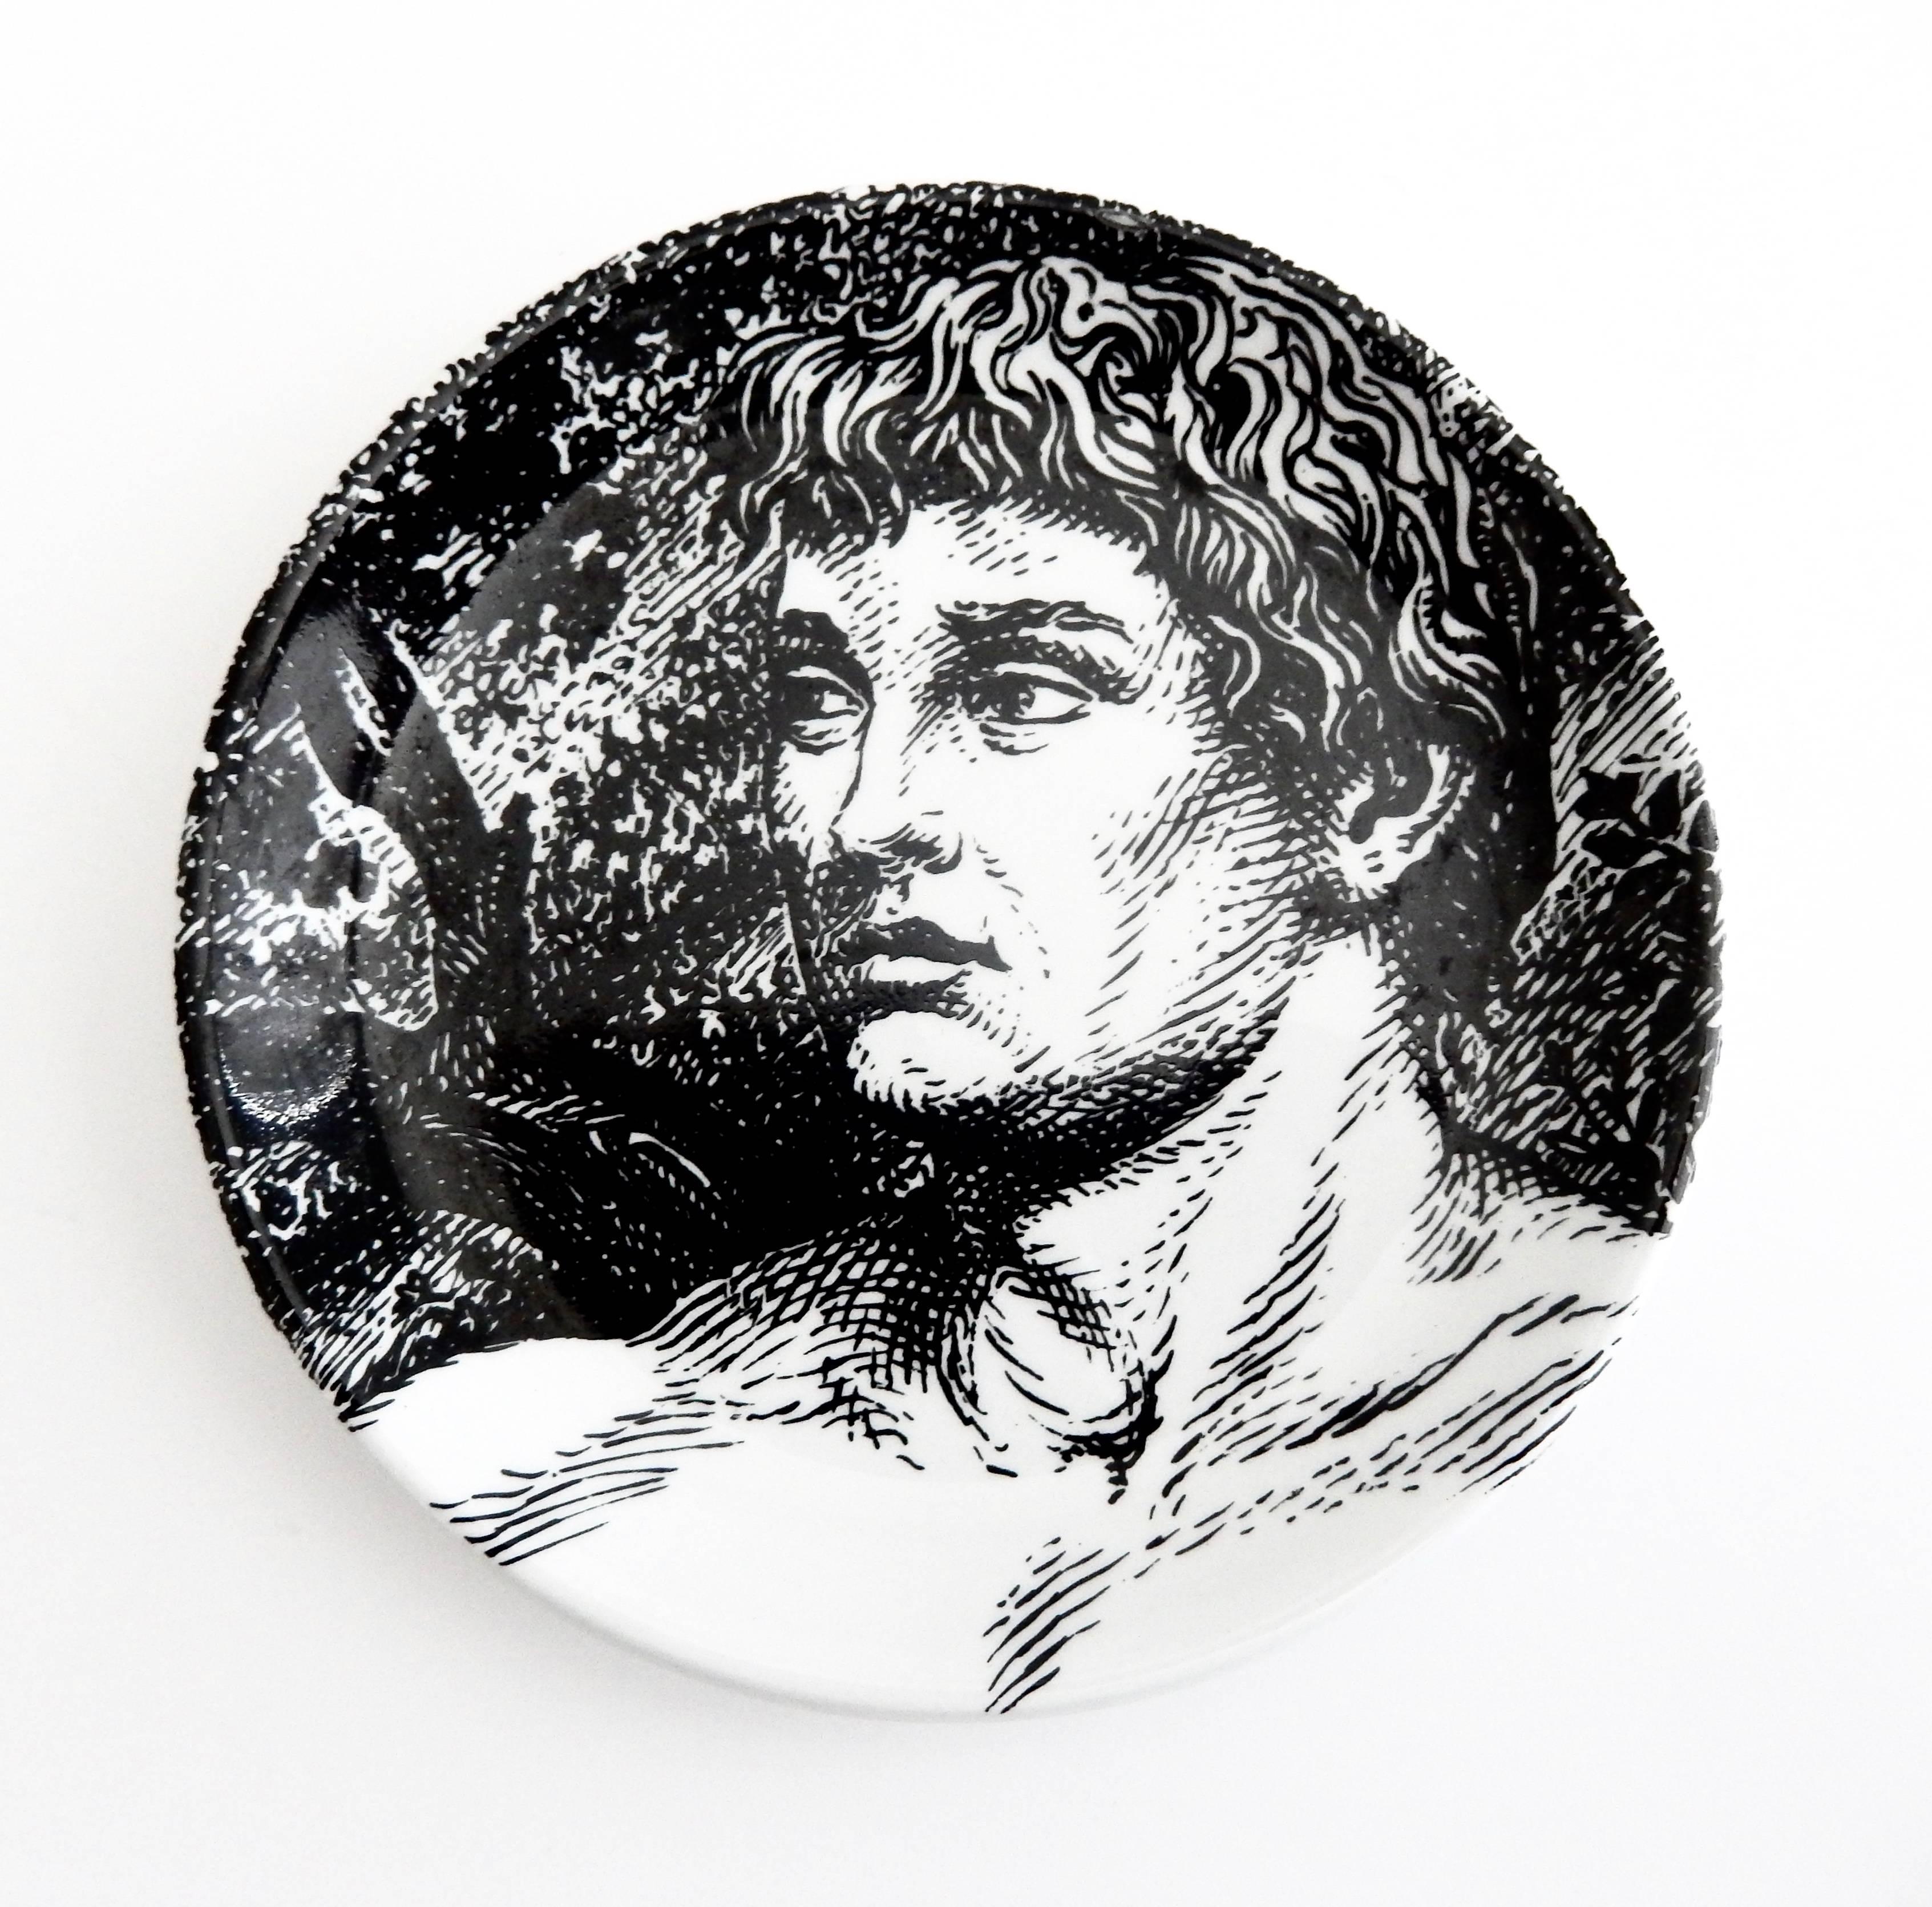 A complete set of eight Fornasetti coasters depicting a reclining, biblical Adam. Fornasetti has created a fascinating, interactive ceramic jigsaw puzzle of the figure of Adam to be arranged by the viewer. This set is in excellent condition and